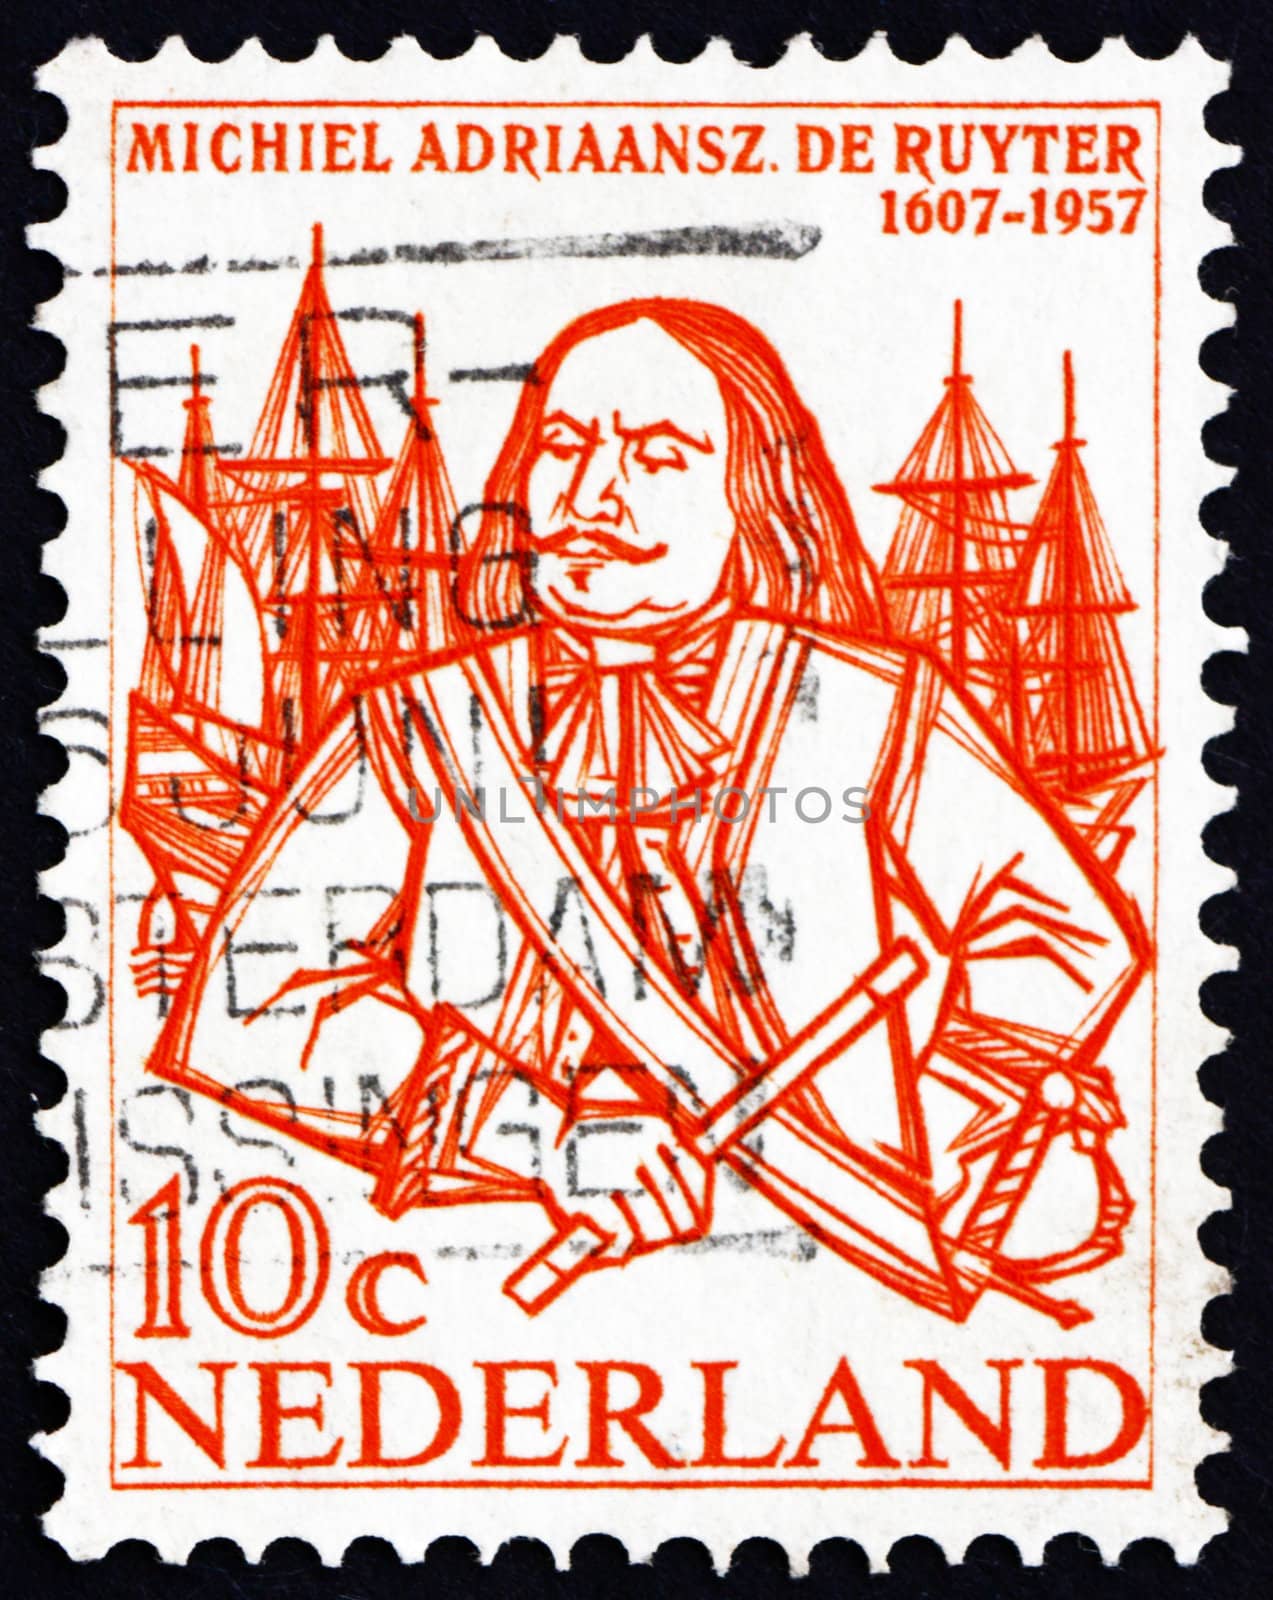 NETHERLANDS - CIRCA 1957: a stamp printed in the Netherlands shows Michiel de Ruyter, Dutch Admiral, circa 1957